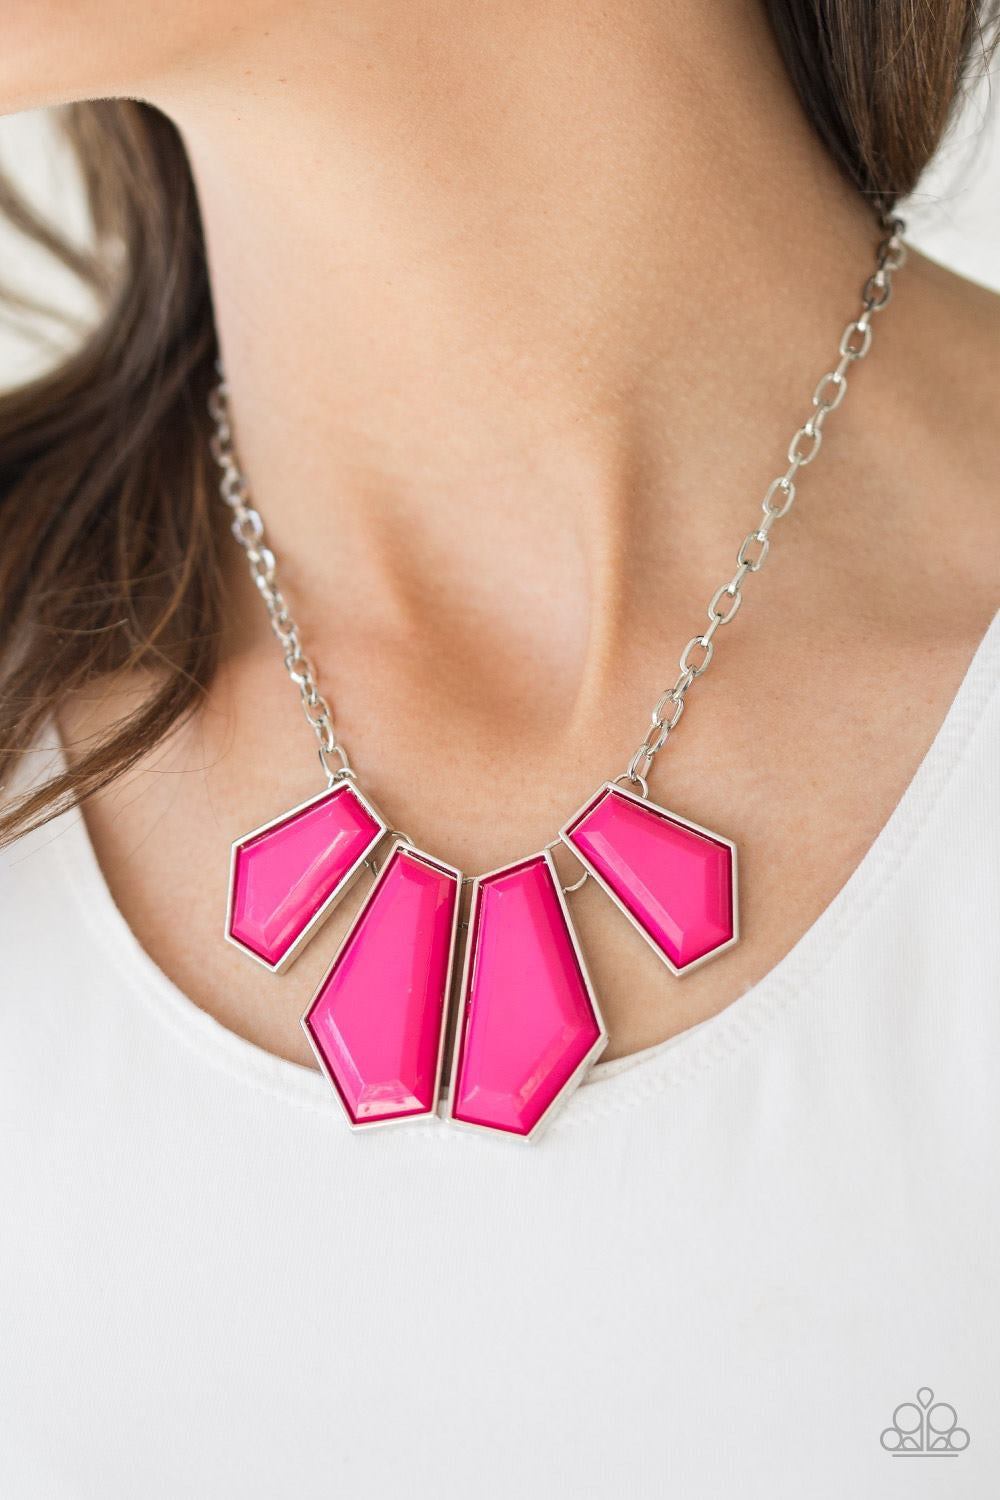 Get Up and GEO Pink Necklace 1325n